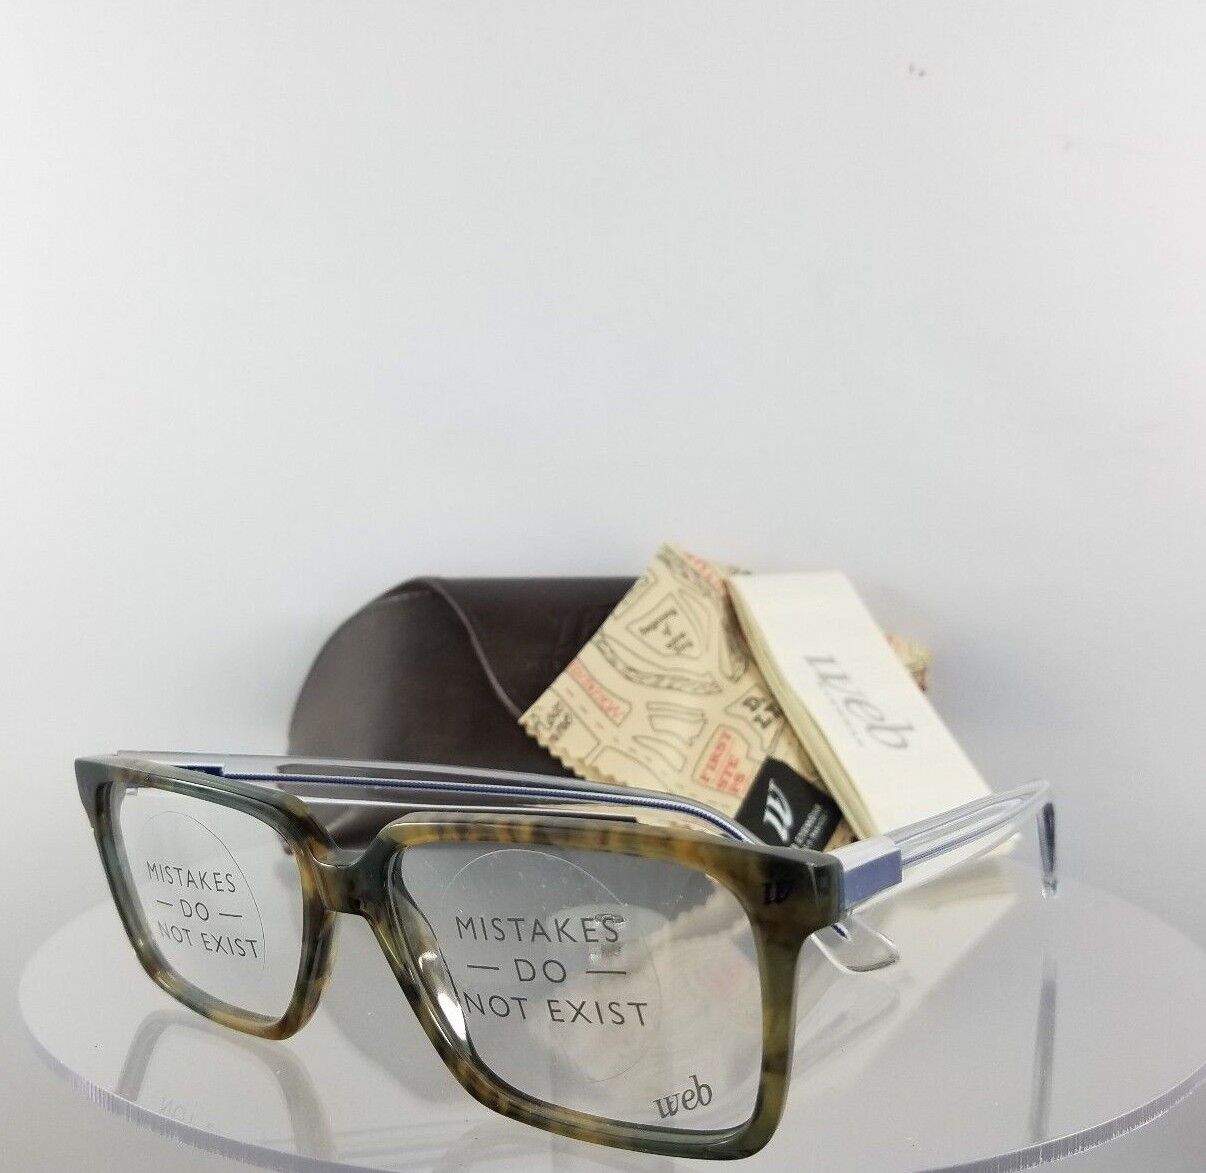 Brand New Authentic Web Eyeglasses We 5122 Col. 056 Beaufort Clear 54Mm Frame